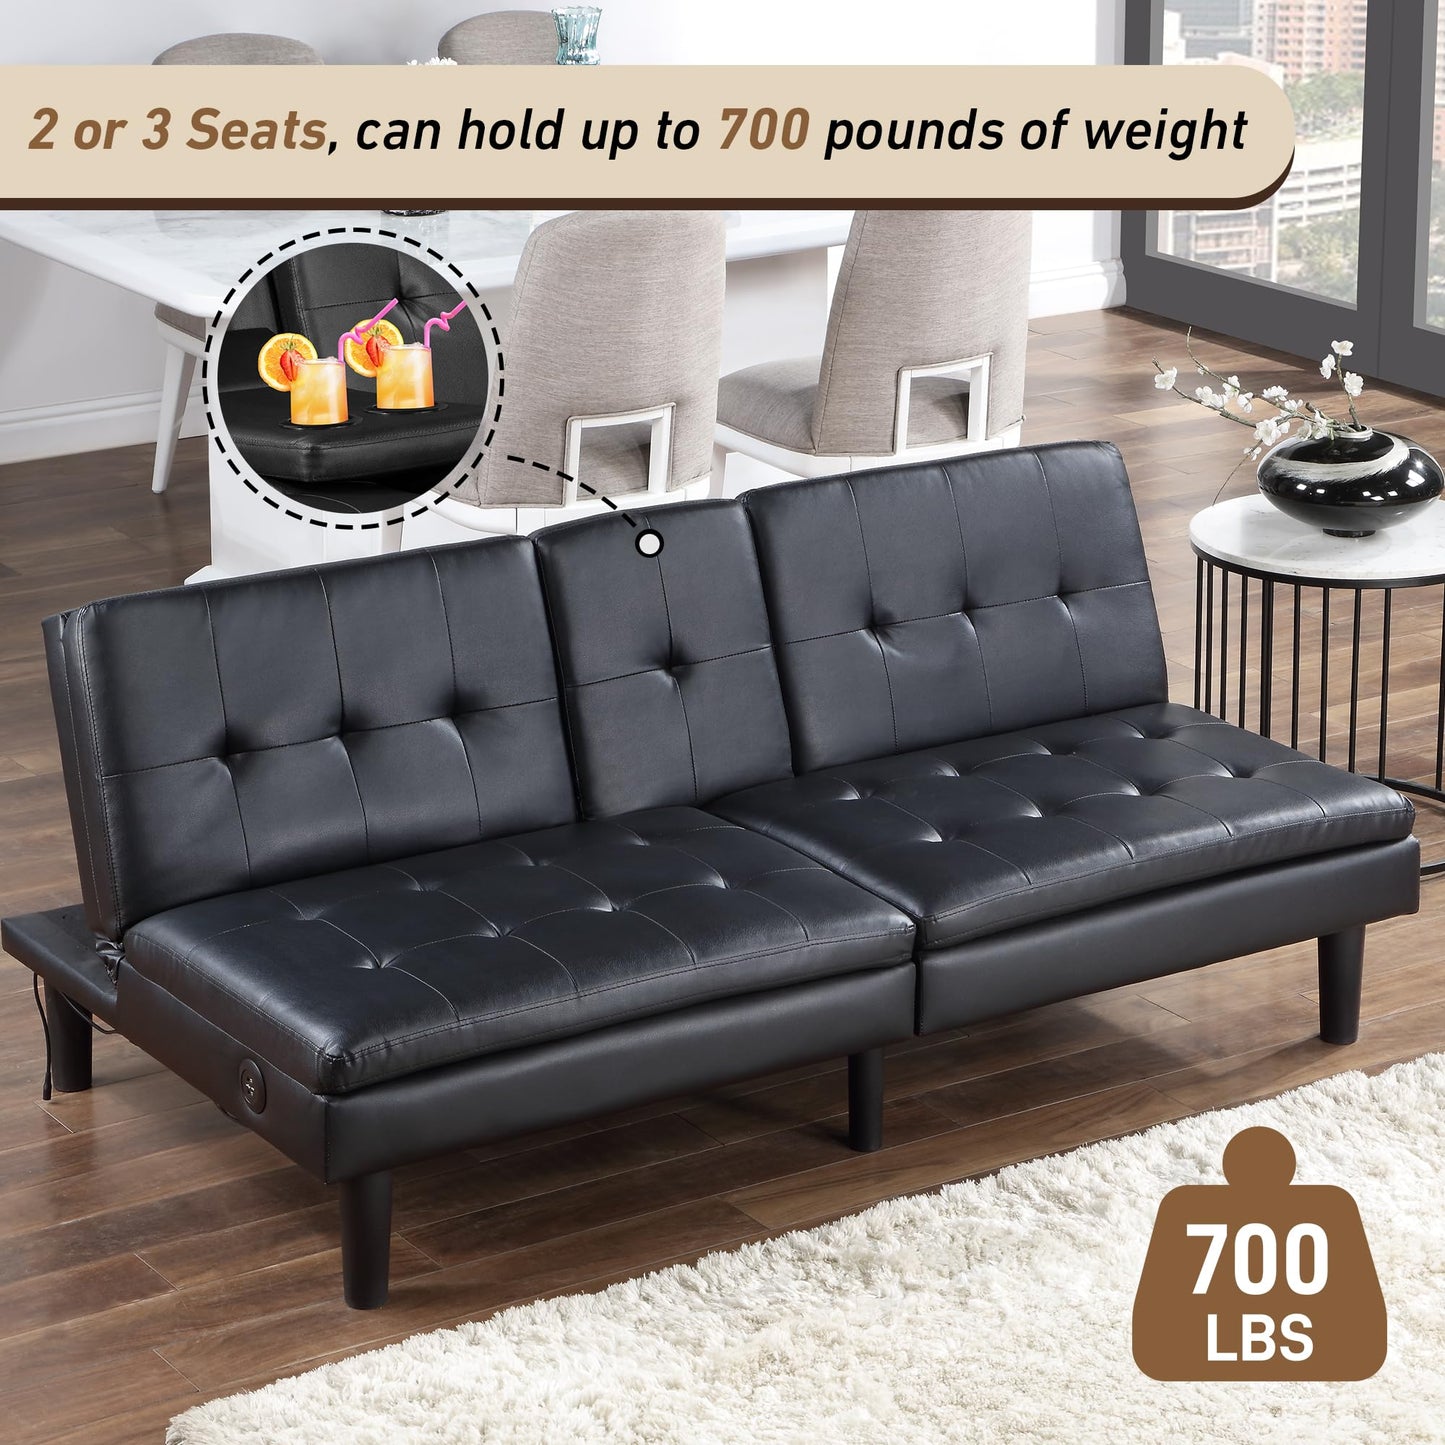 PrimeZone 69" W x 38" D x 29.5" H Futon Convertible Sofa Bed with USB & 2 Cupholders - Faux Leather Modern Memory Foam Sleeper Couch, Folding